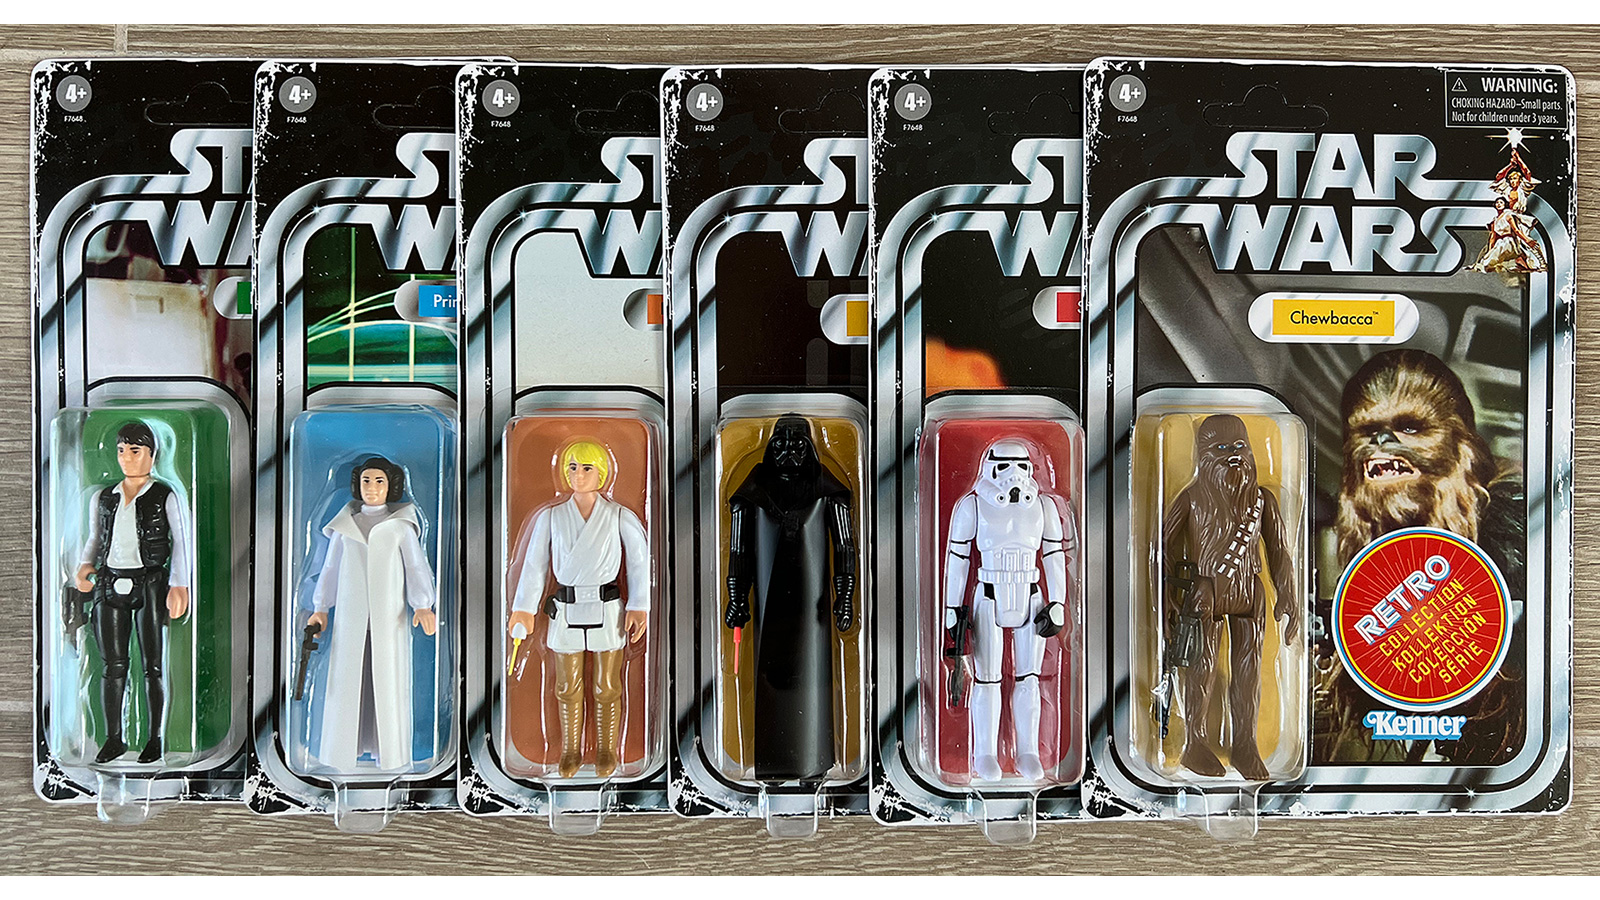 Changes To Re-Released Figures In Exclusive Retro Collection Star Wars: A New Hope Multipack Set